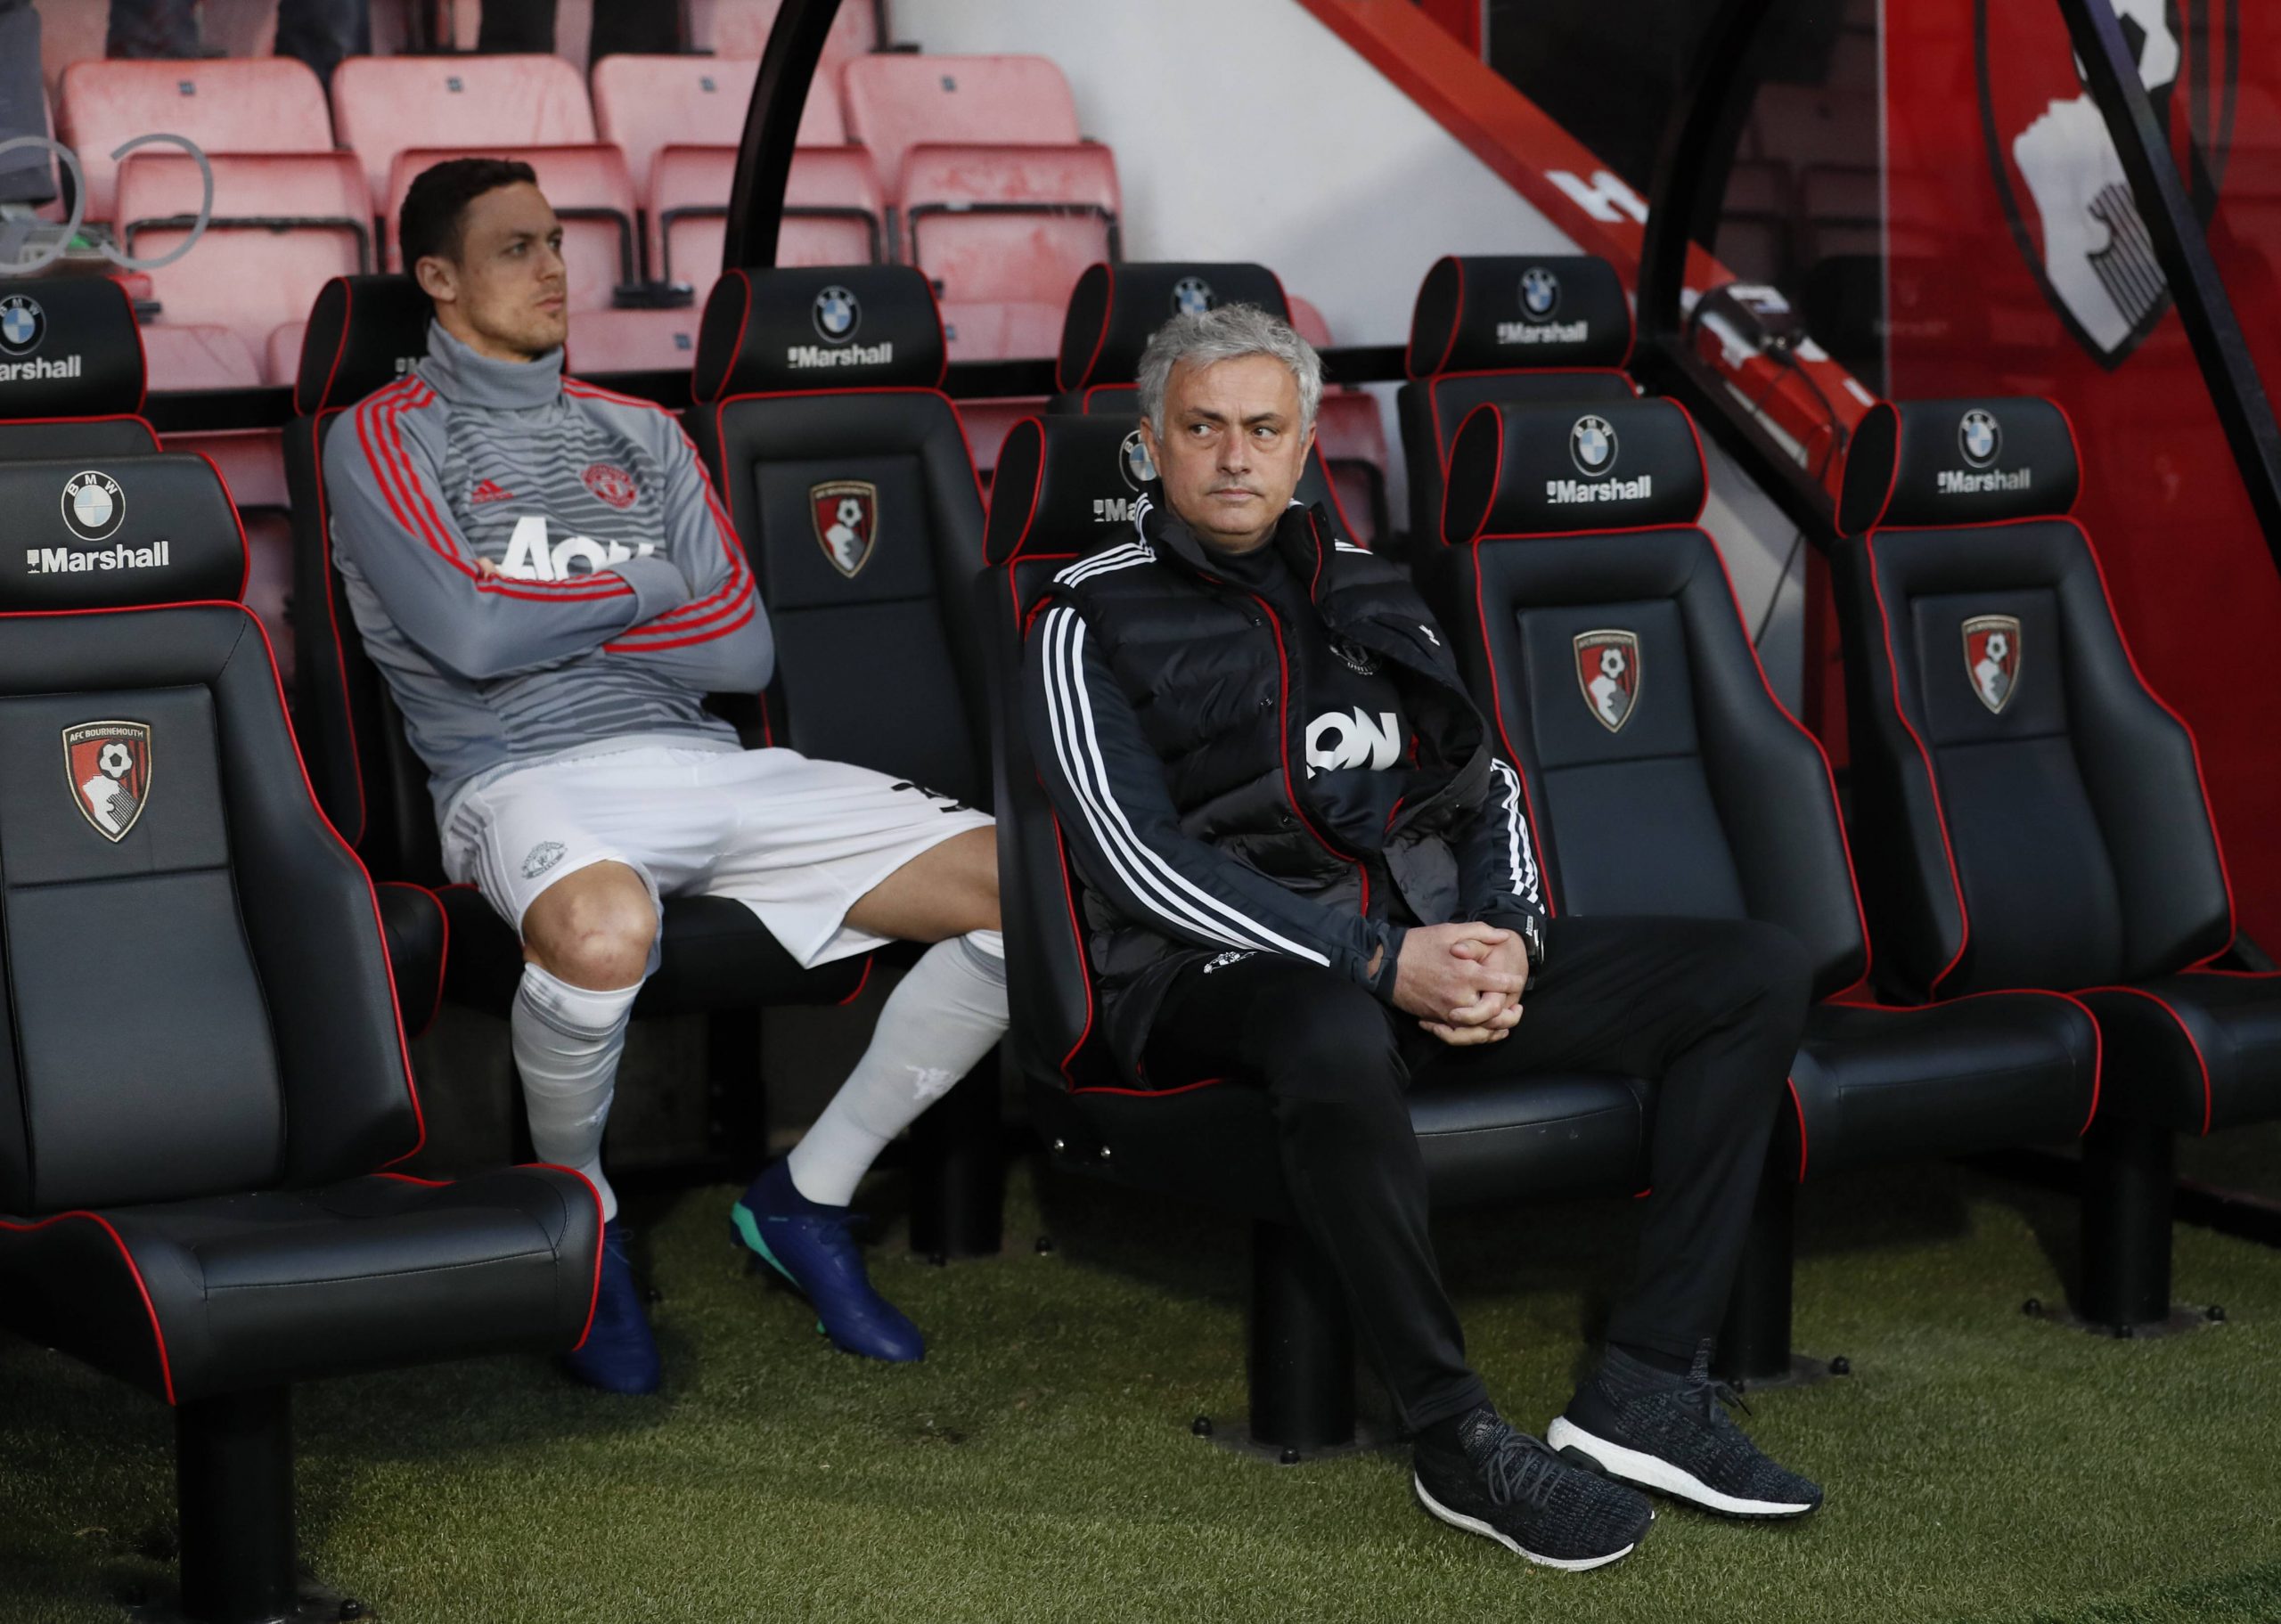 Jose Mourinho during his time at Manchester United. (Image: David Klein/Sportimage)